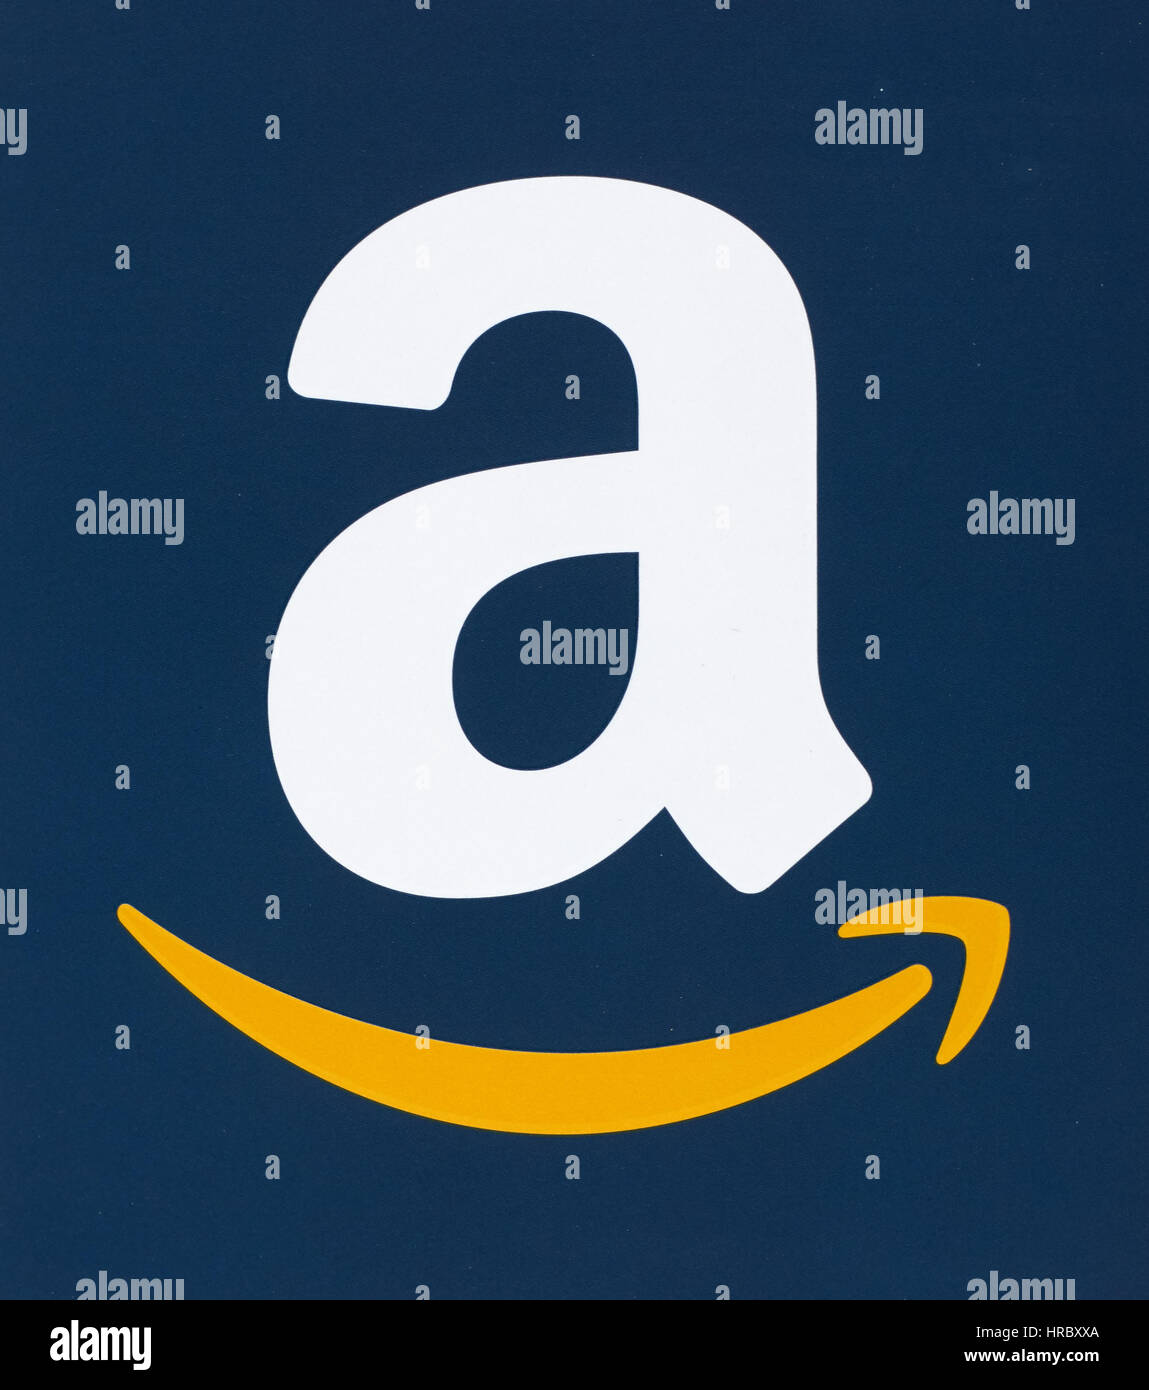 MONTREAL, CANADA - FEBRUARY 28, 2017: Amazon logo printed on a blue paper. Amazon is an American electronic commerce and cloud computing company that  Stock Photo